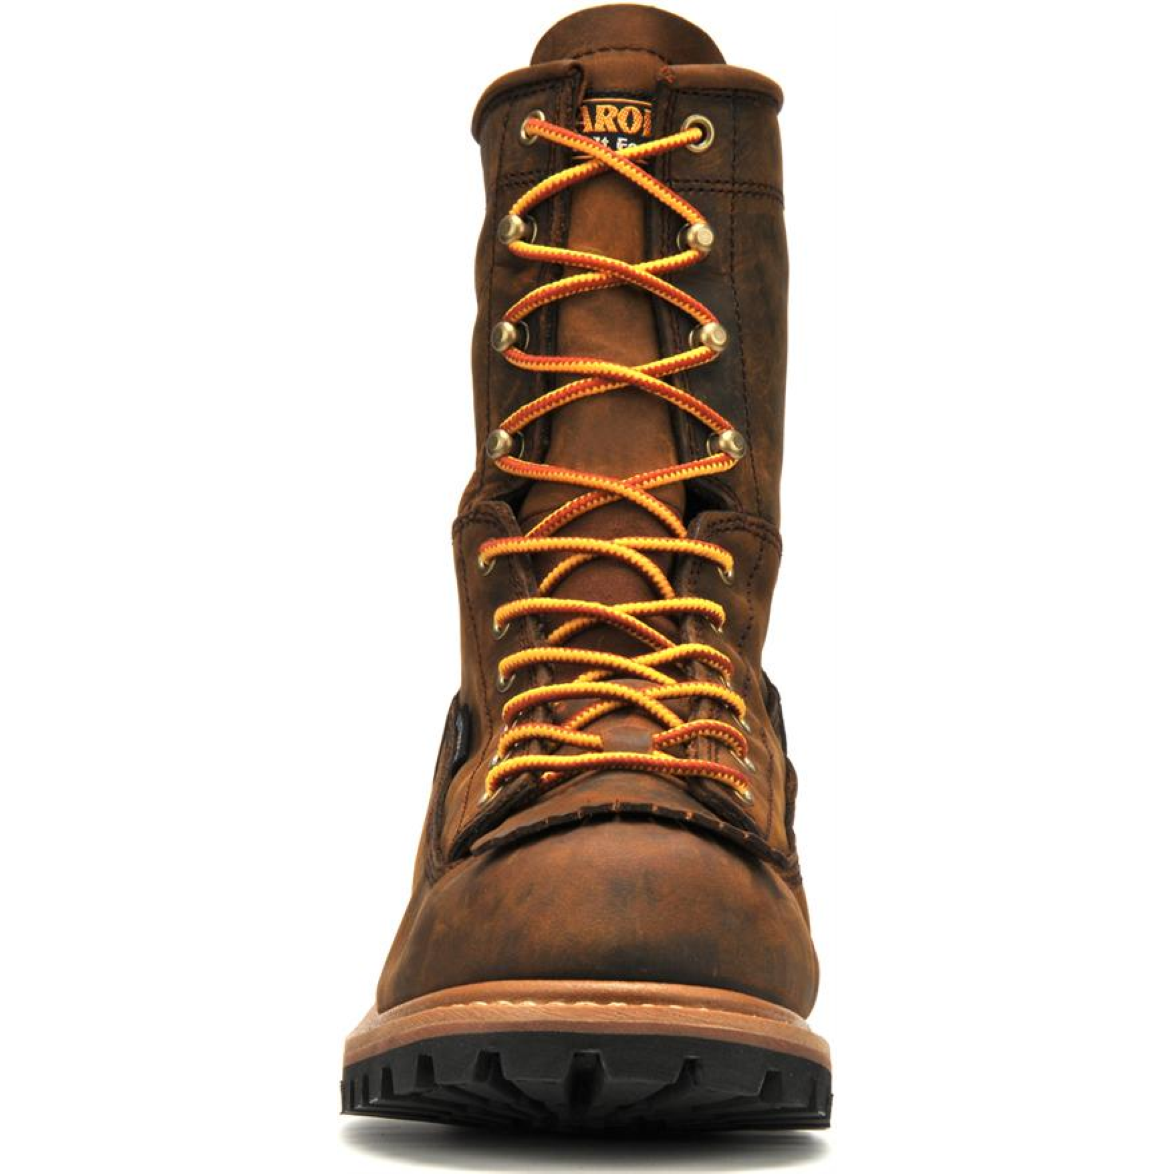 Carolina Men's Spruce 8" WP Lace-to-Toe Logger Work Boot, Brown CA8824  - Overlook Boots